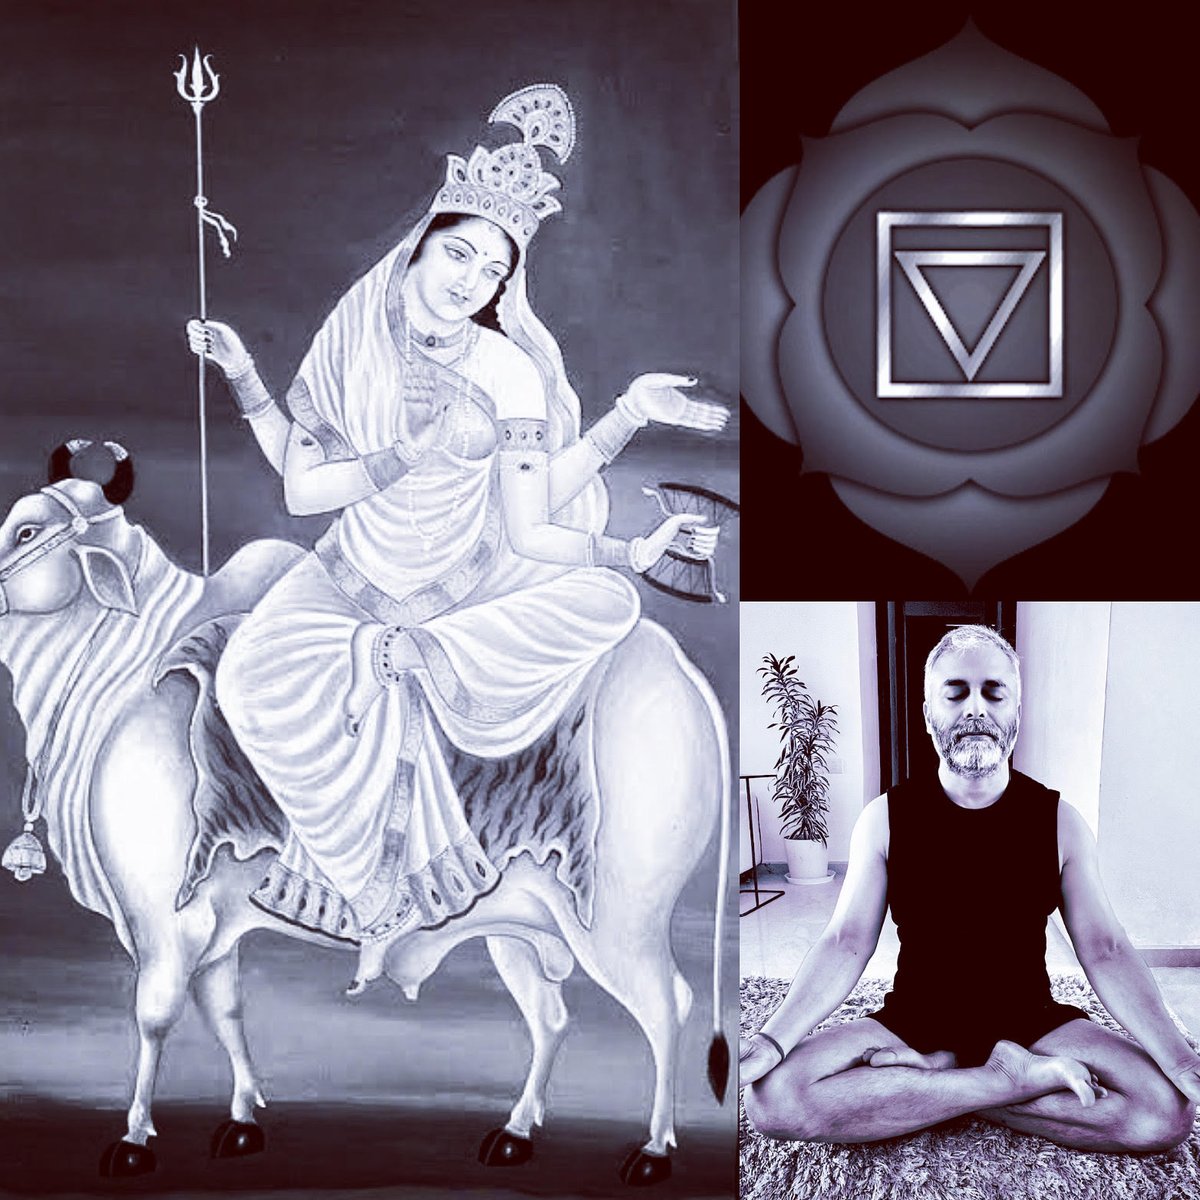 1st day of #navratri is the #yogic #start to reach higher and further higher, for spiritual evolution, and for the attainment of #siddhi. Today, 1st day - is day of #mother #Shailaputri who is the #muladhara #shakti to be realized within #self and sought for higher depths of